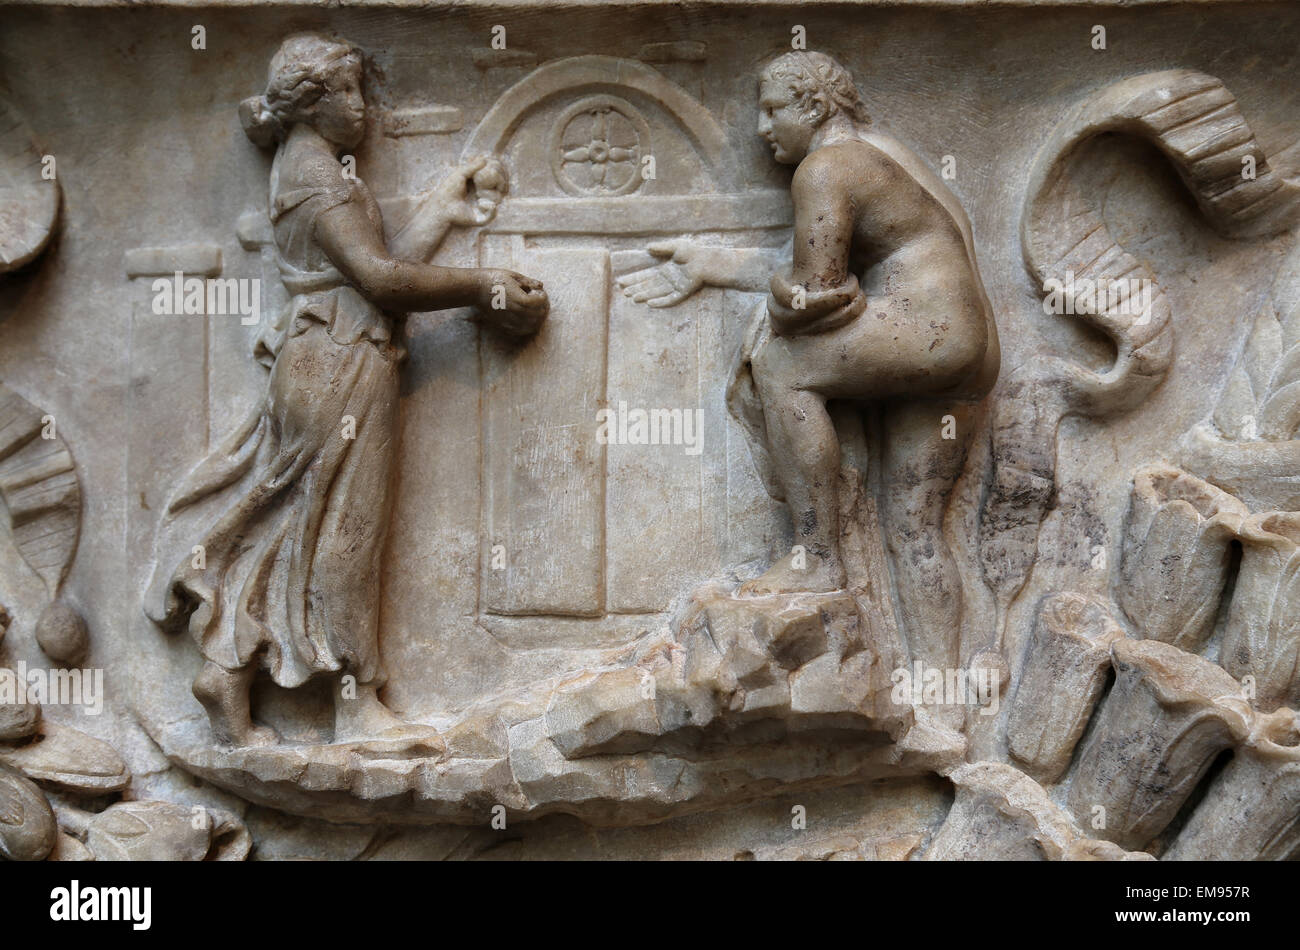 Roman sarcophagus. Myth of Theseus and Ariadne. Hadrianic or Early Antonine period, 130-140 AD. Ariadne and Theseus at labyrinth Stock Photo